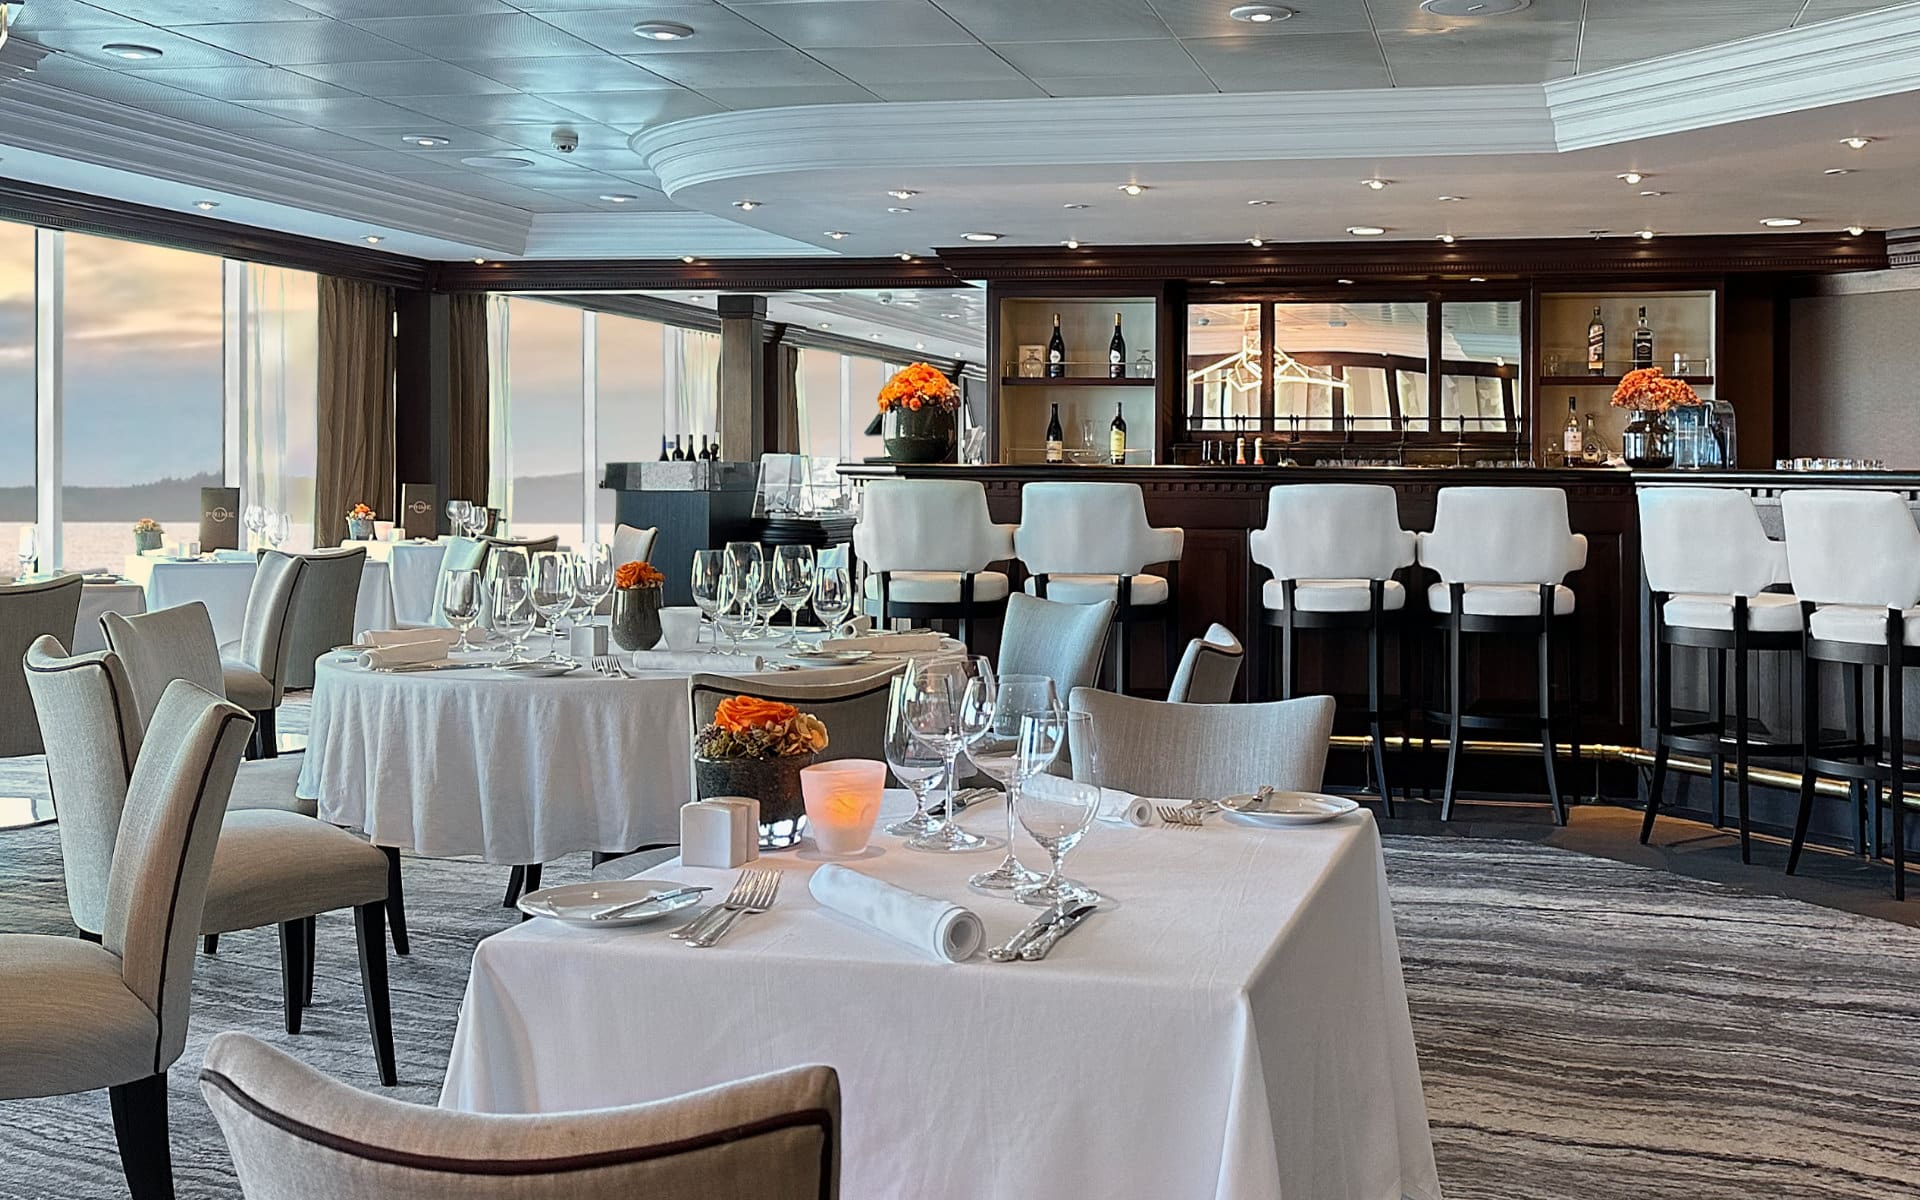 Azamara Pursuit has five restaurants, including this one which is called Prime C.